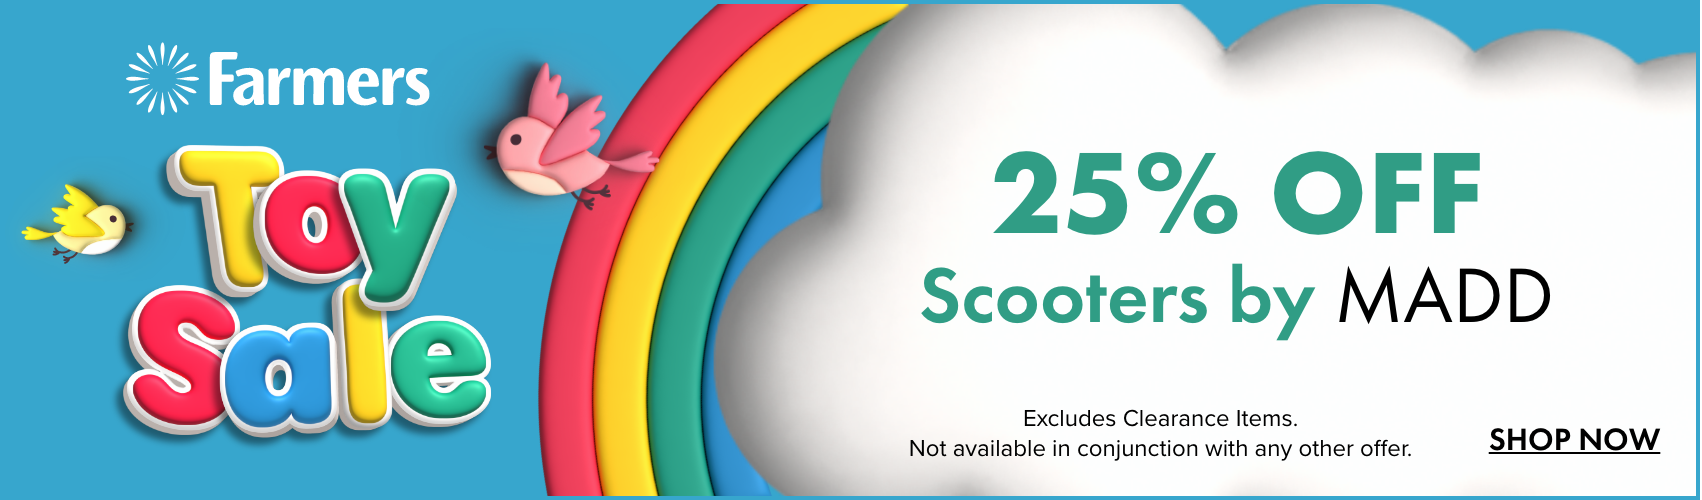 25% OFF Scooters by MADD